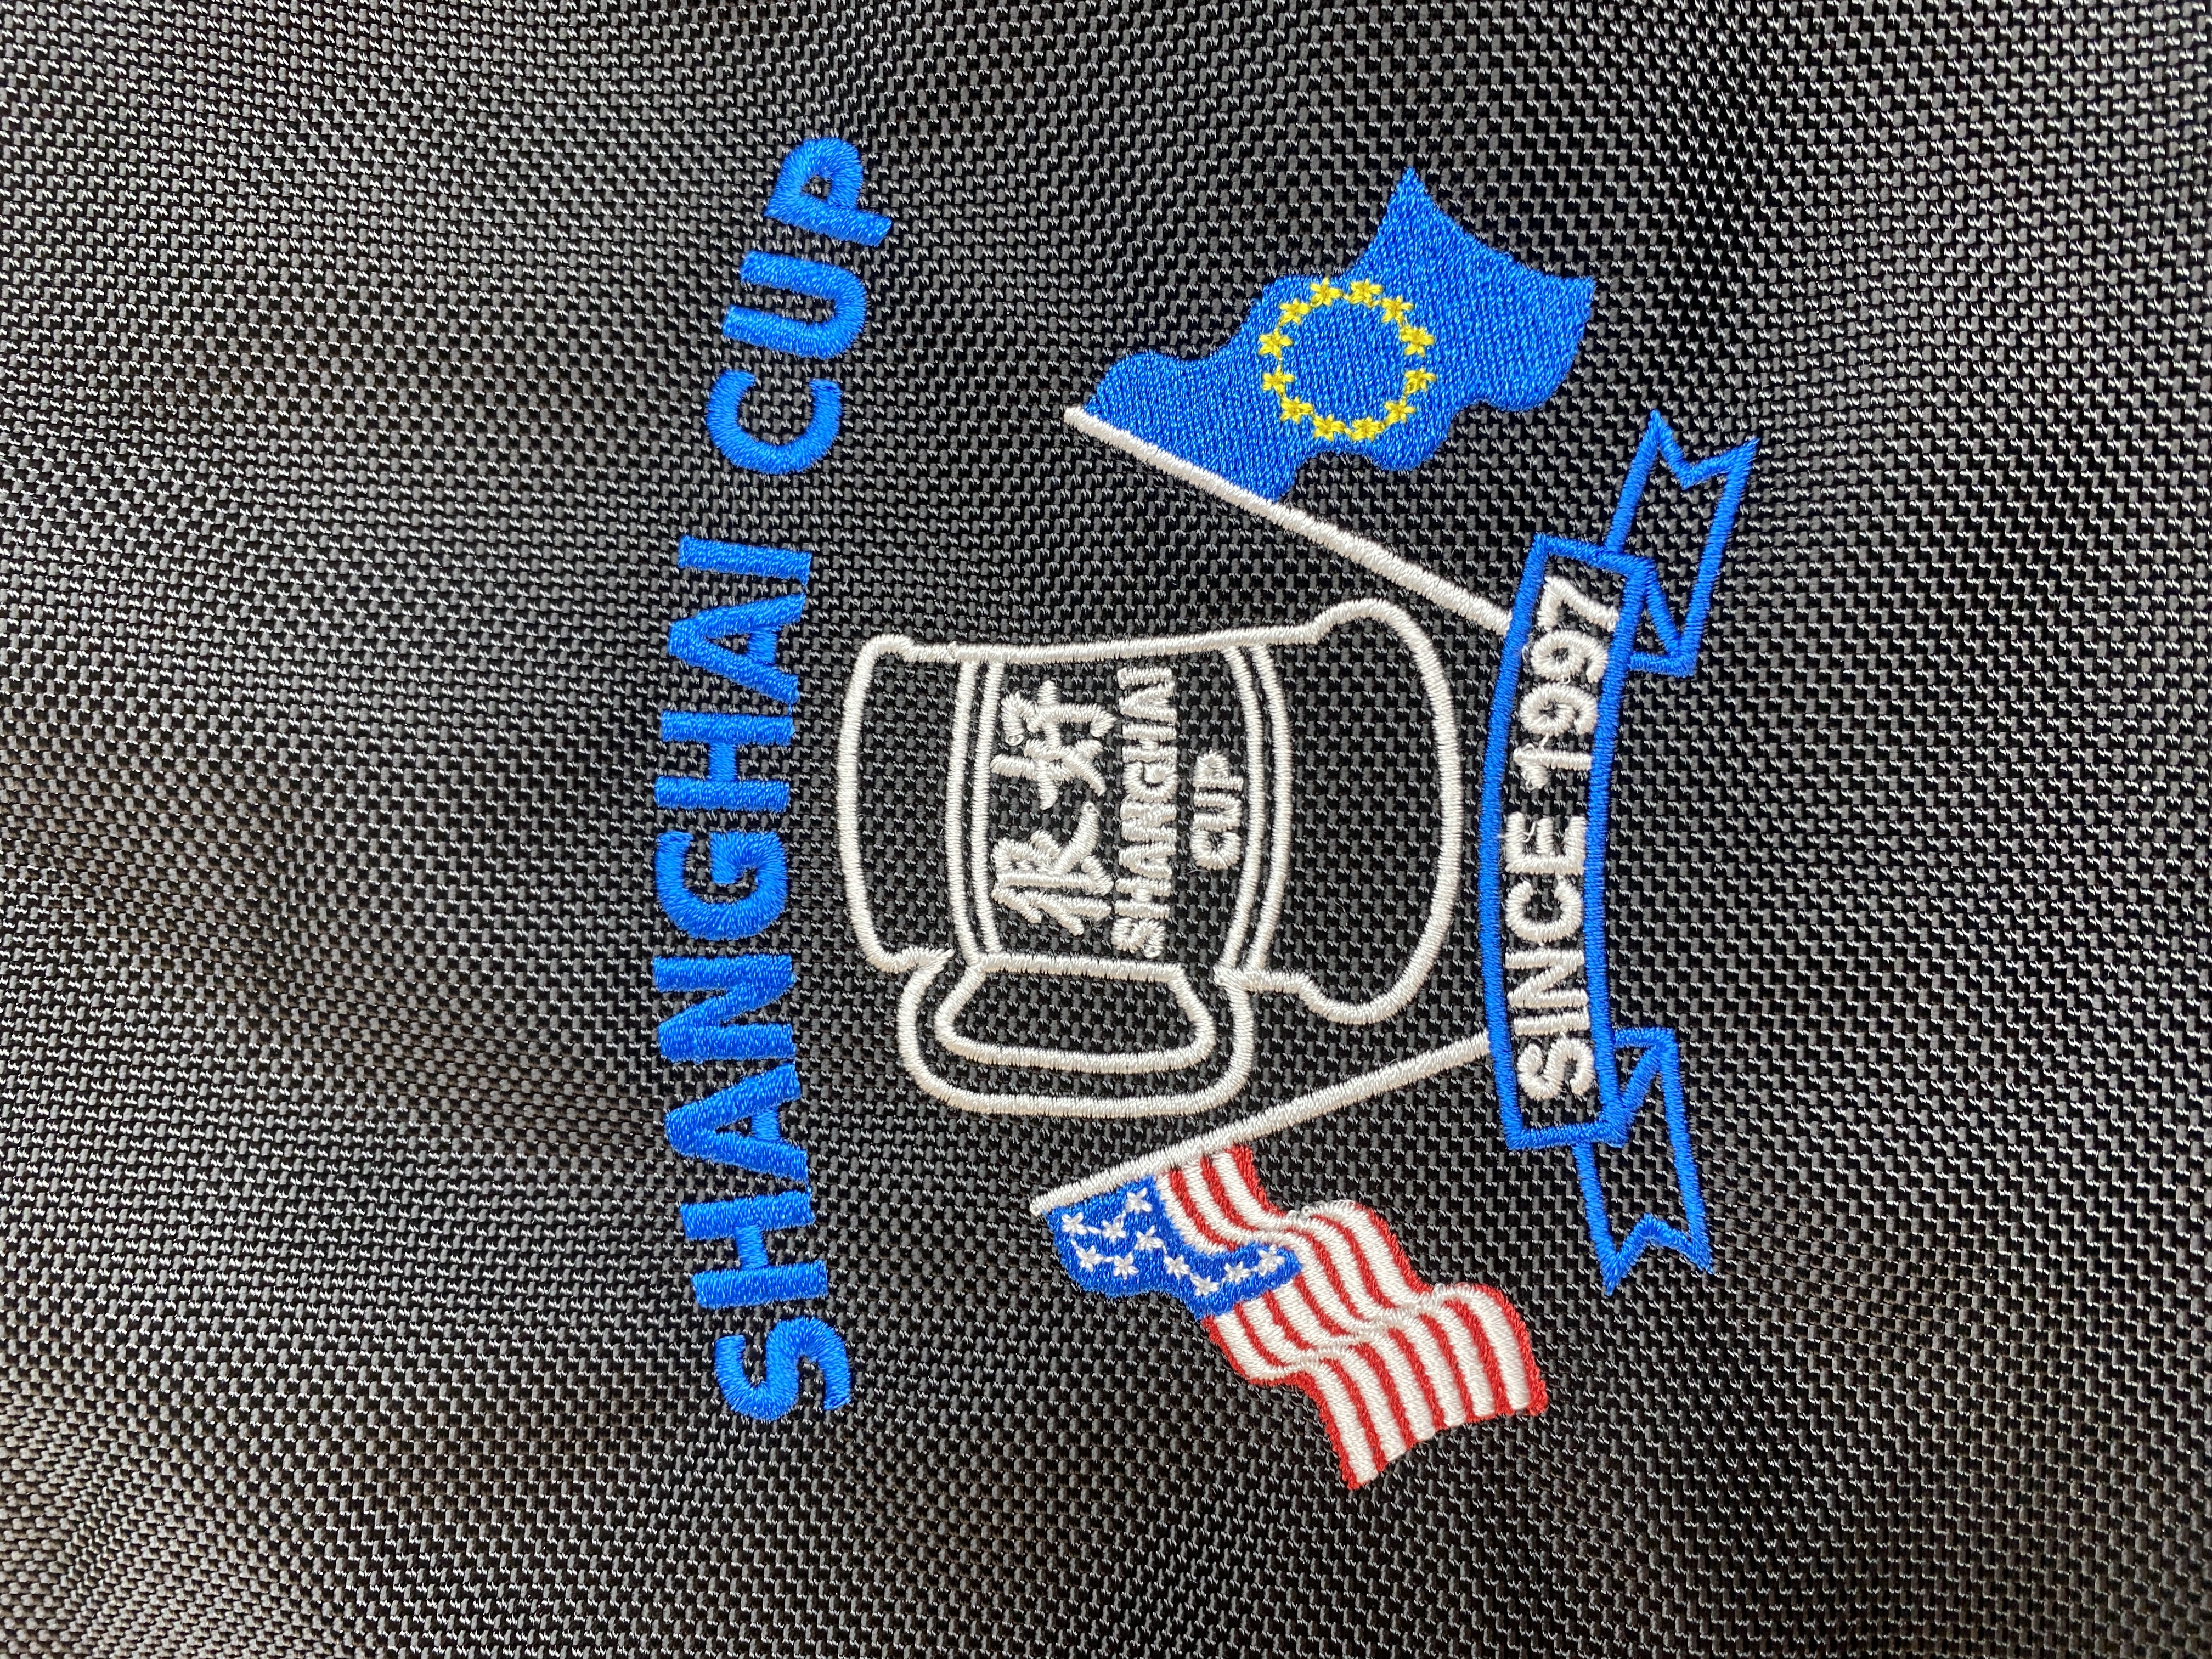 Complex golf bag embroidery